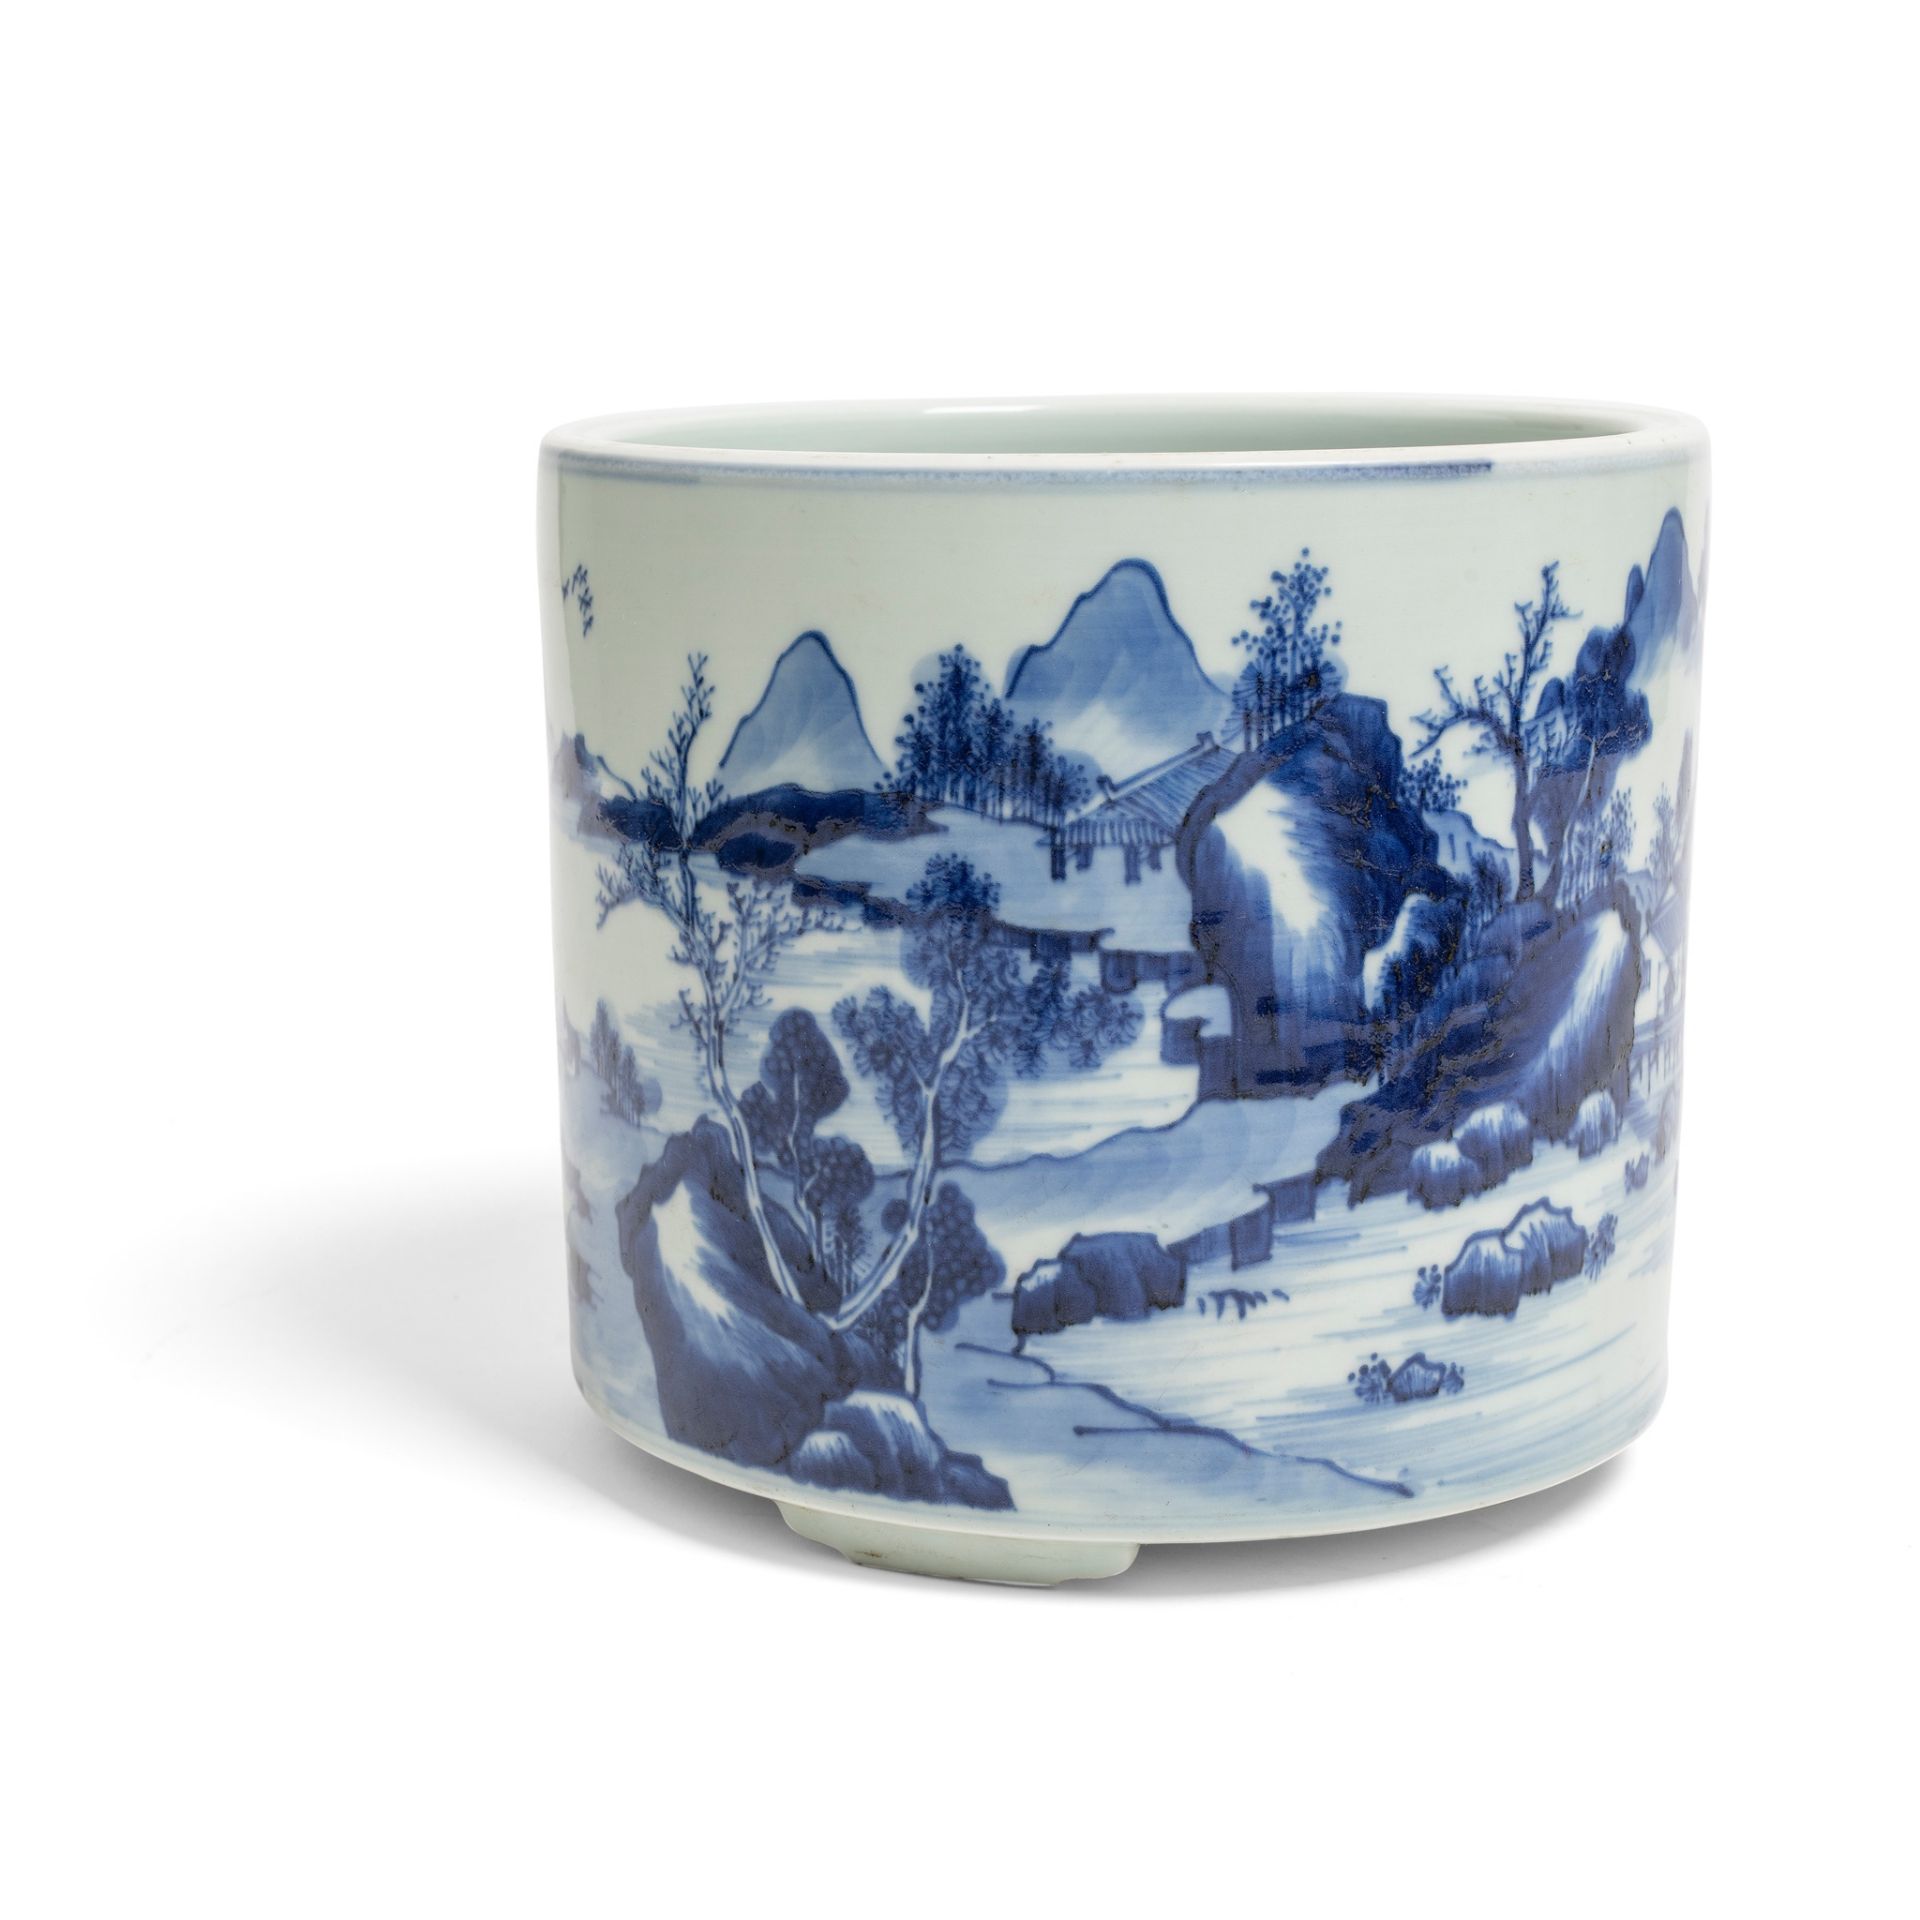 BLUE AND WHITE BRUSH POT QING DYNASTY, 18TH-19TH CENTURY